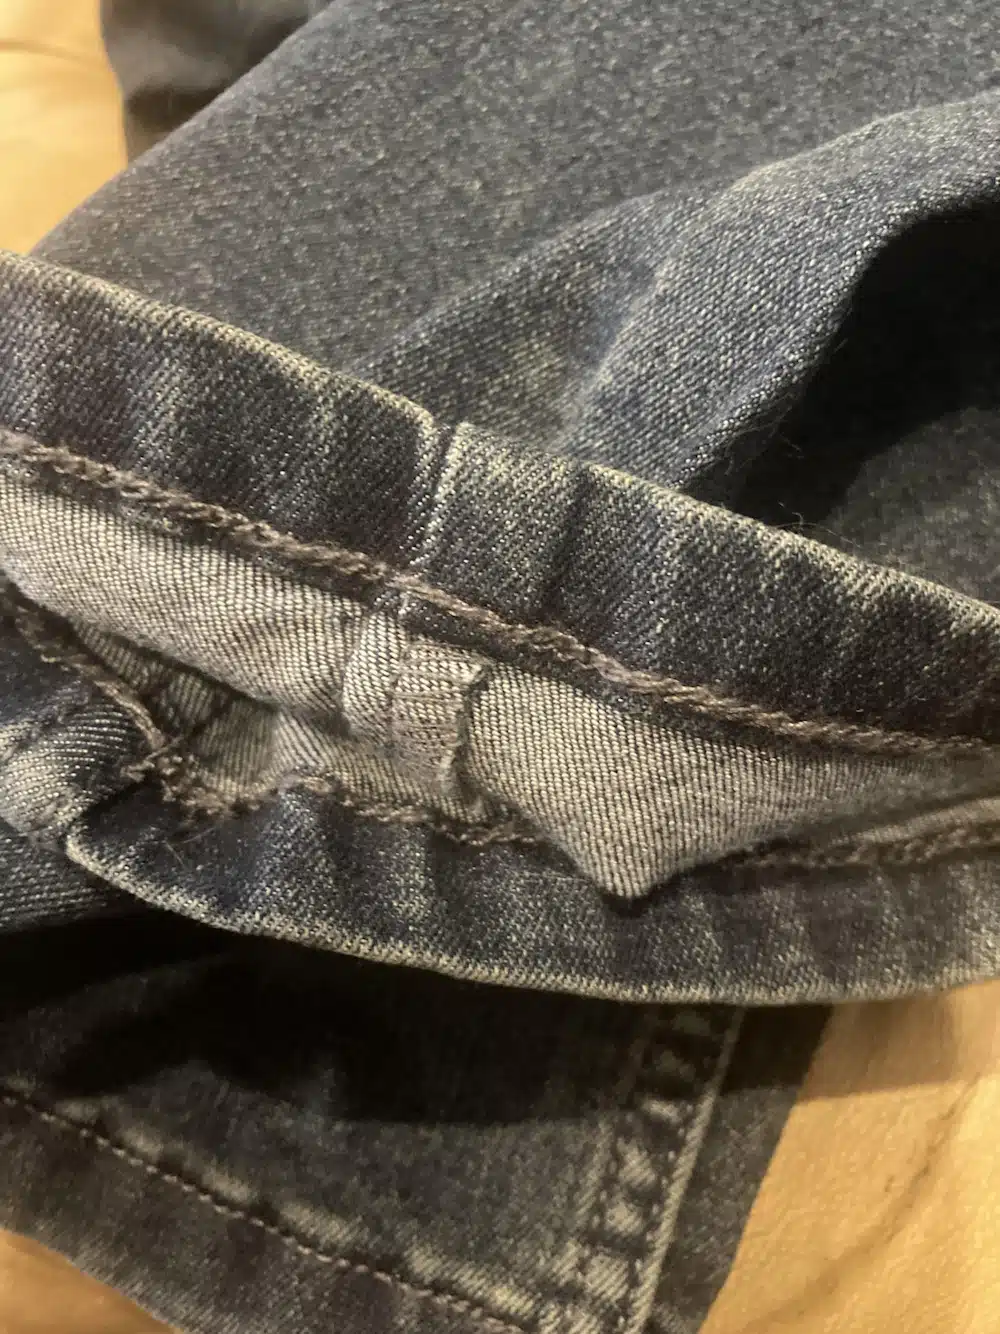 The Perfect Jean Review (Overhyped or Just Right?)